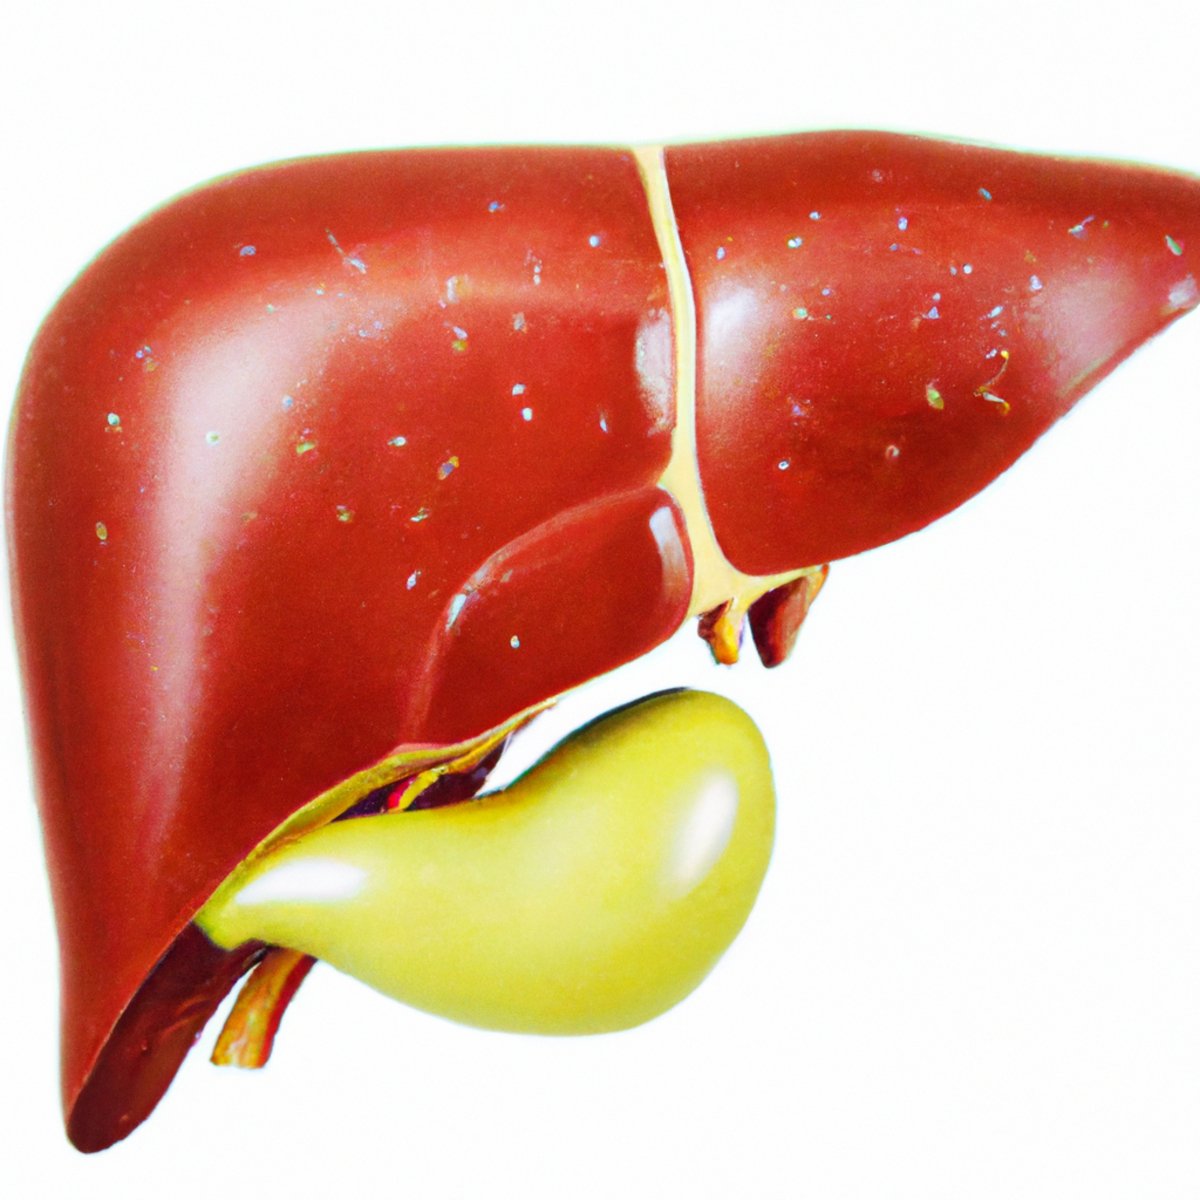 Close-up of lifelike human liver model, showcasing intricate structure, lobes, bile ducts, and blood vessels with remarkable accuracy - Caroli Disease